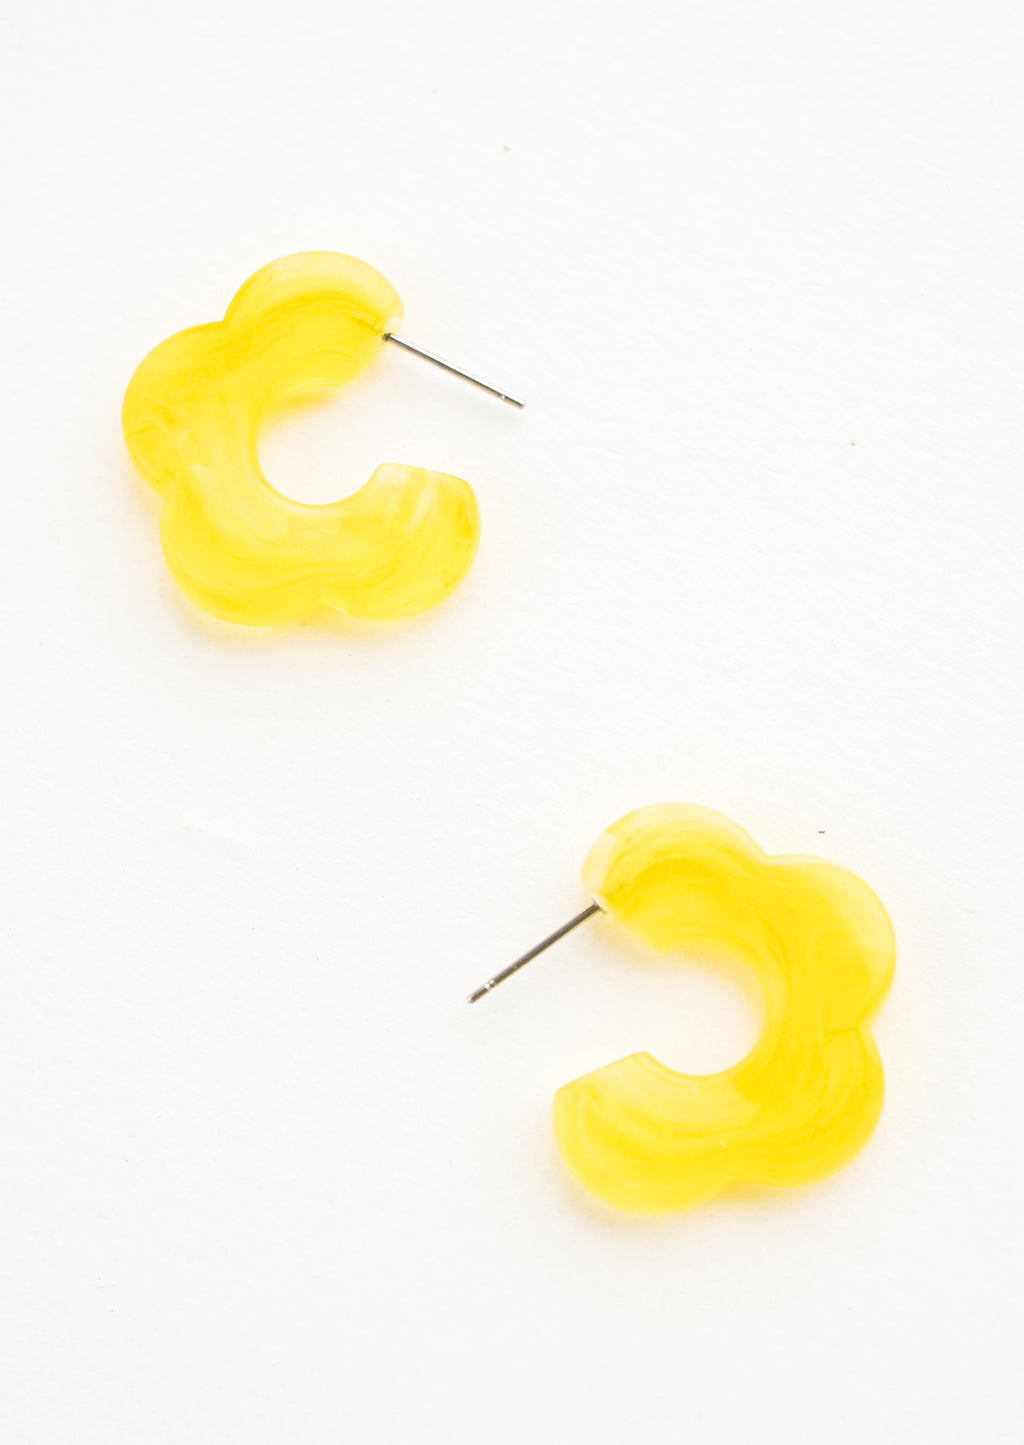 Pineapple: Acetate earrings in the shape of a daisy-like flower, translucent lemon yellow color